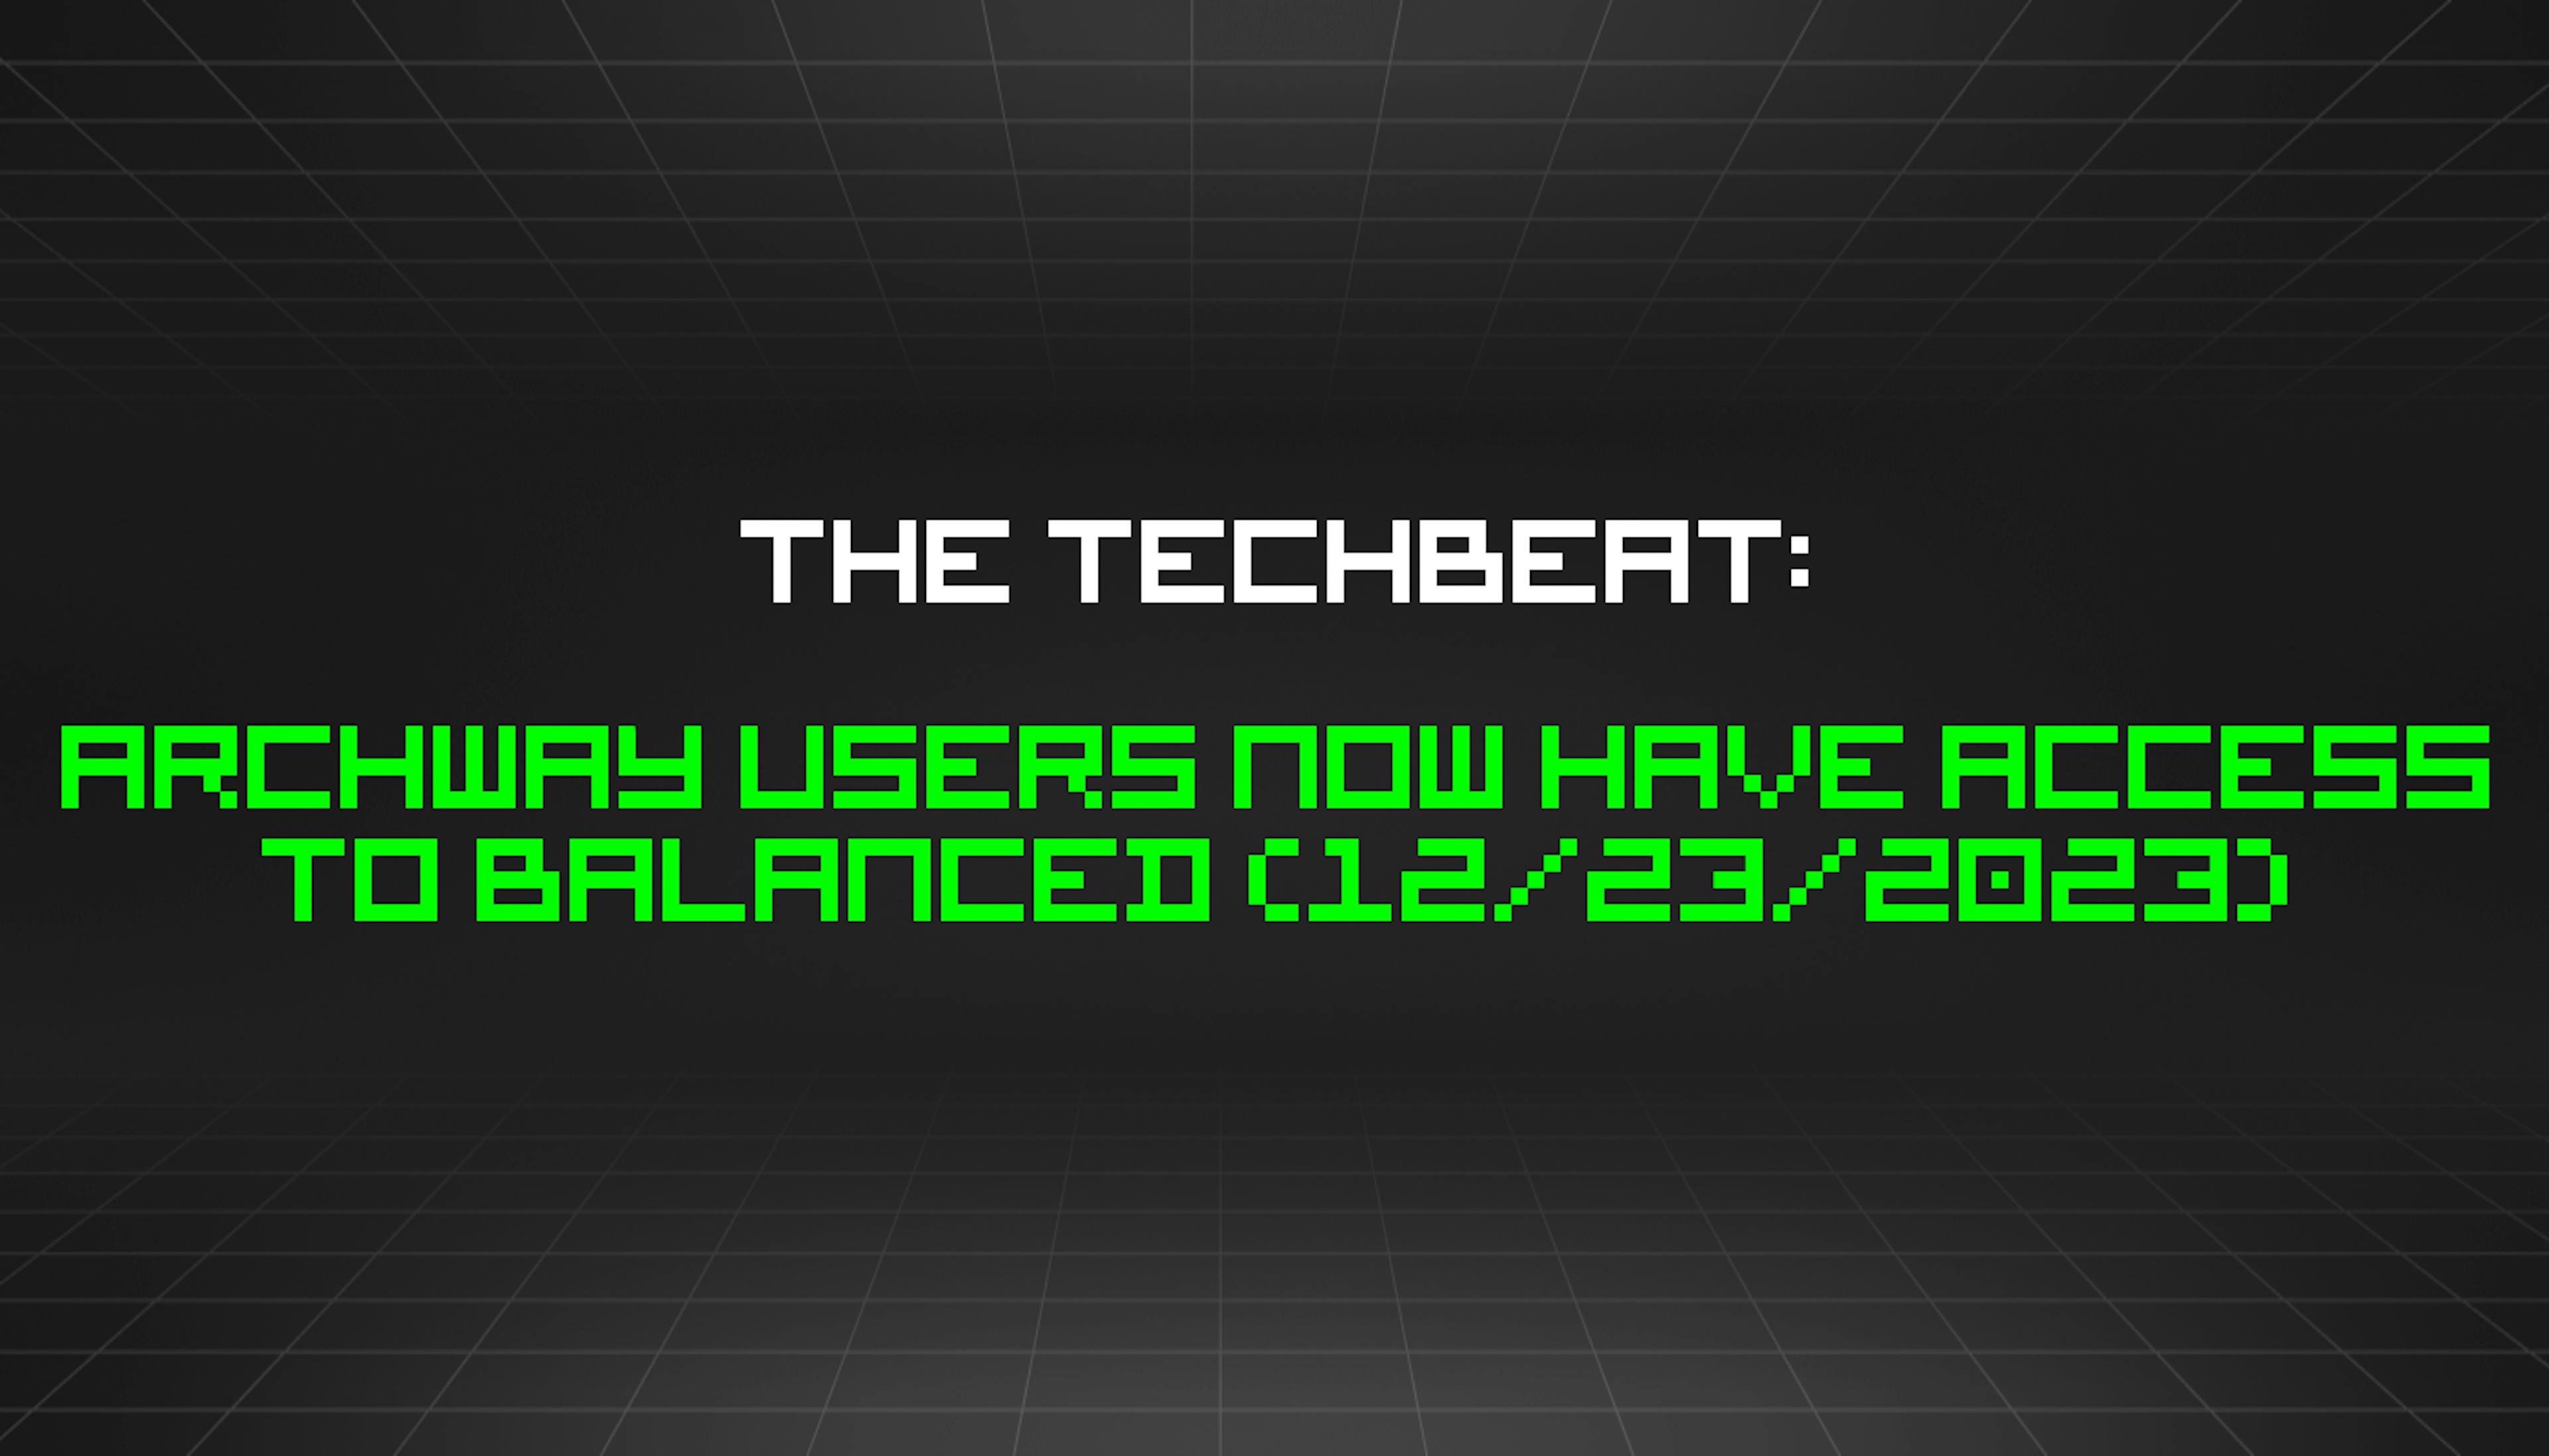 featured image - The TechBeat: Archway Users Now Have Access to Balanced (12/23/2023)